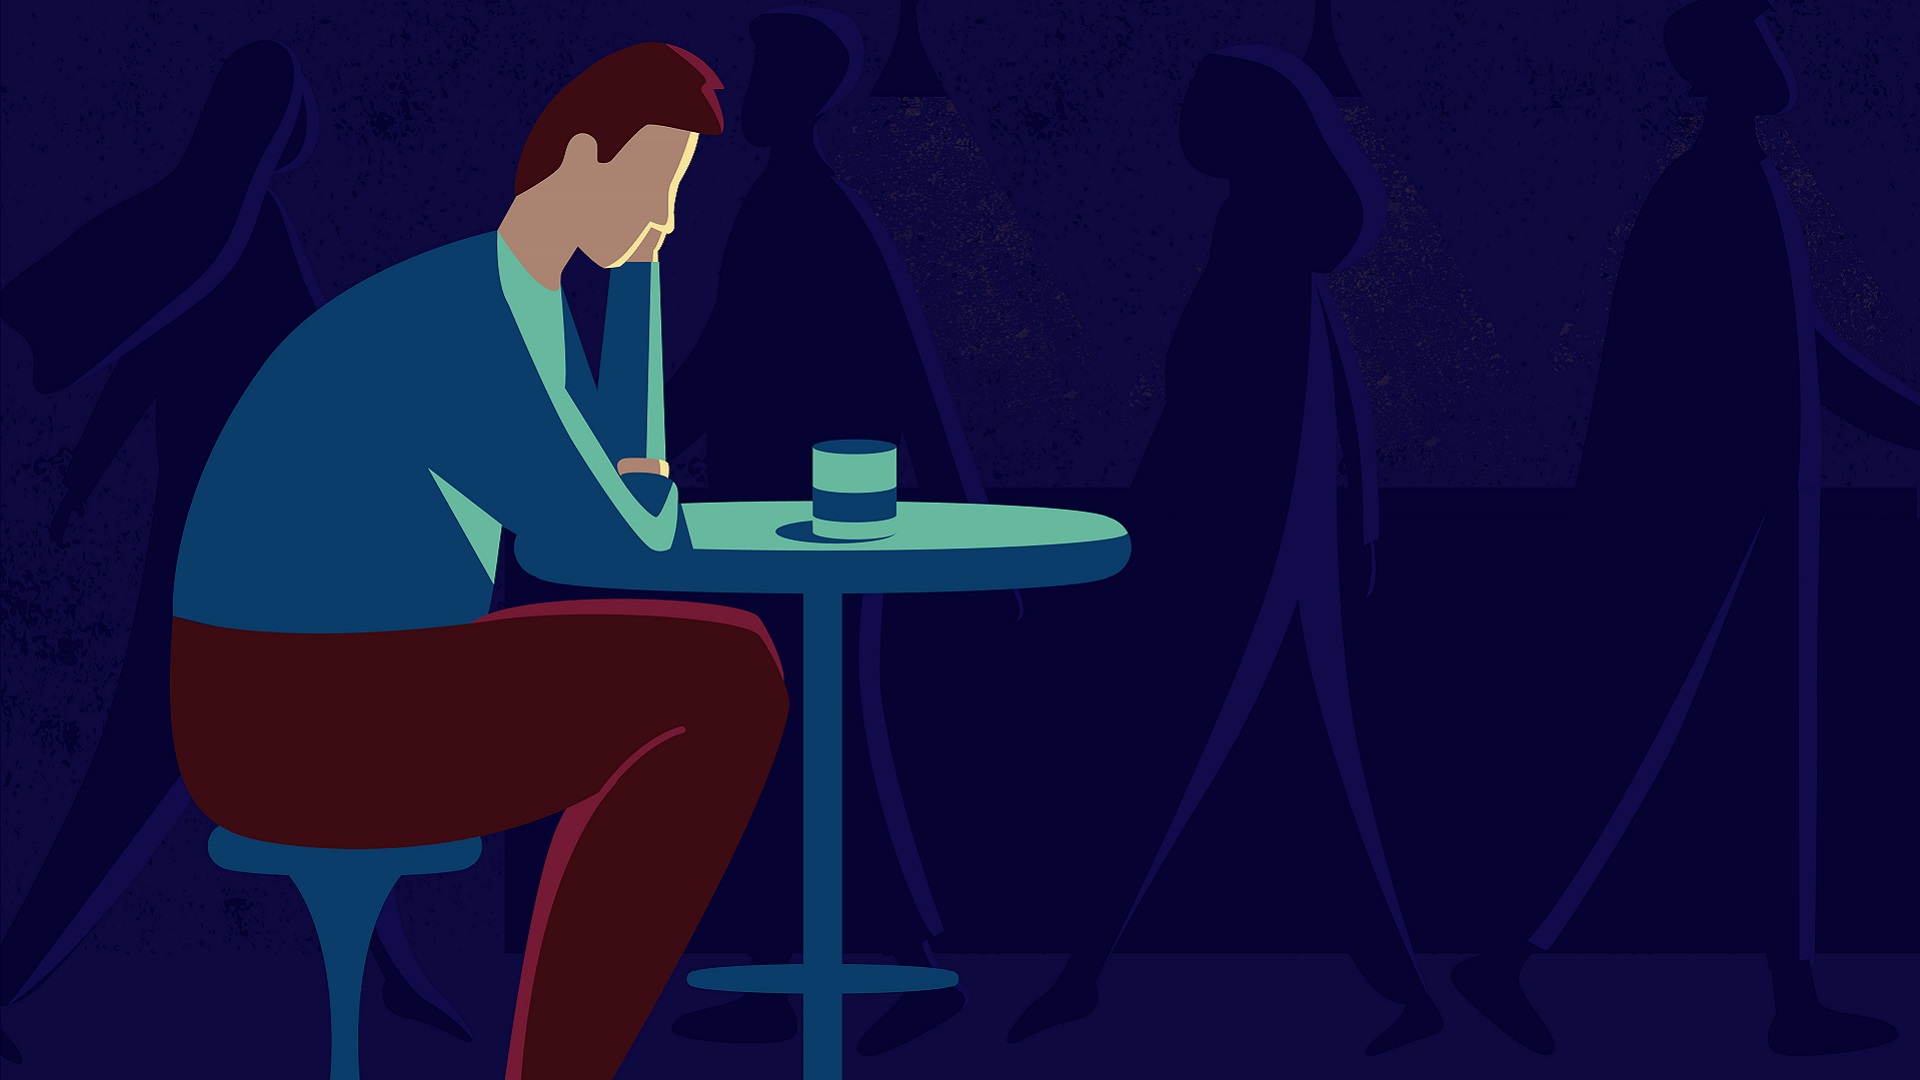 An illustration of a man with ADHD and depression sitting at a table.